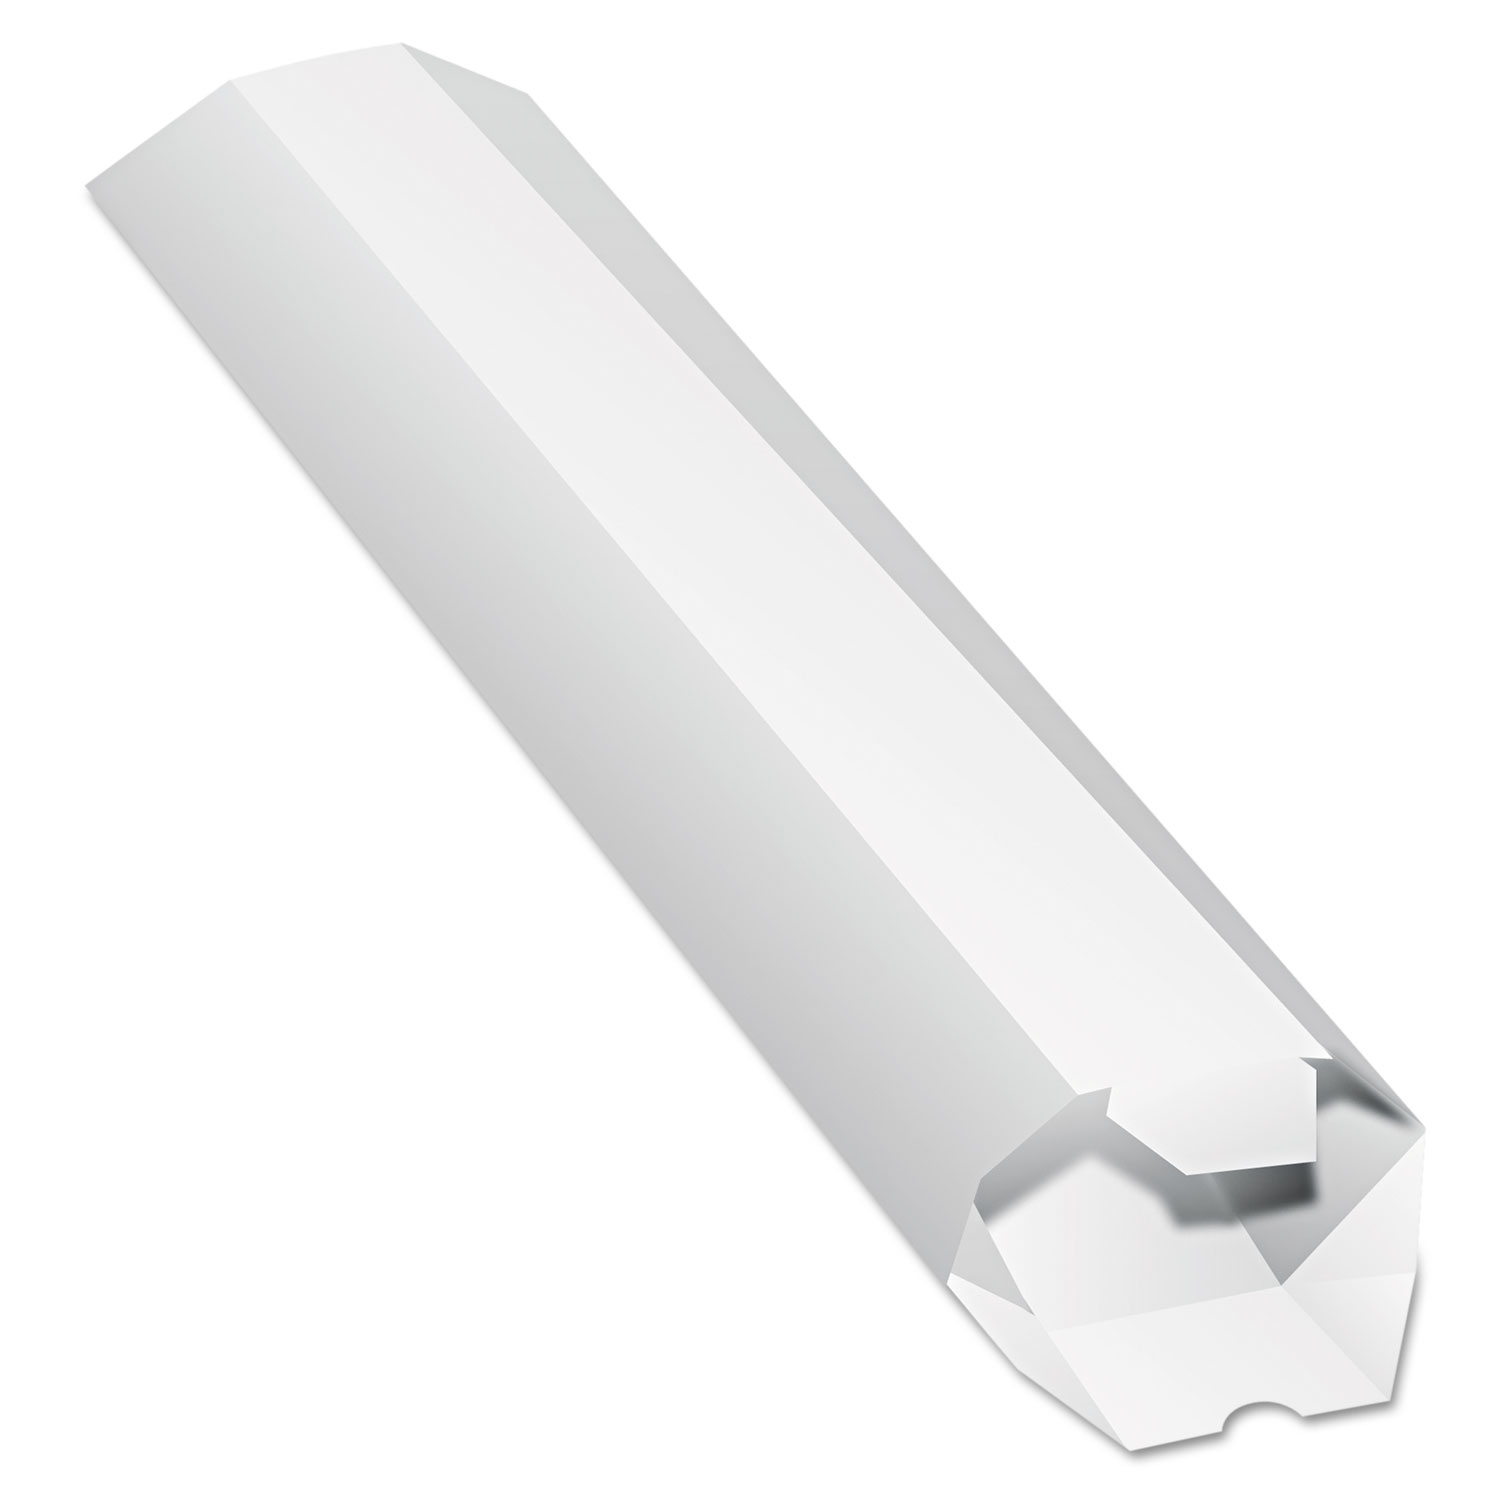 Expand-on-Demand Mailing Tubes, 24l x 2dia, White